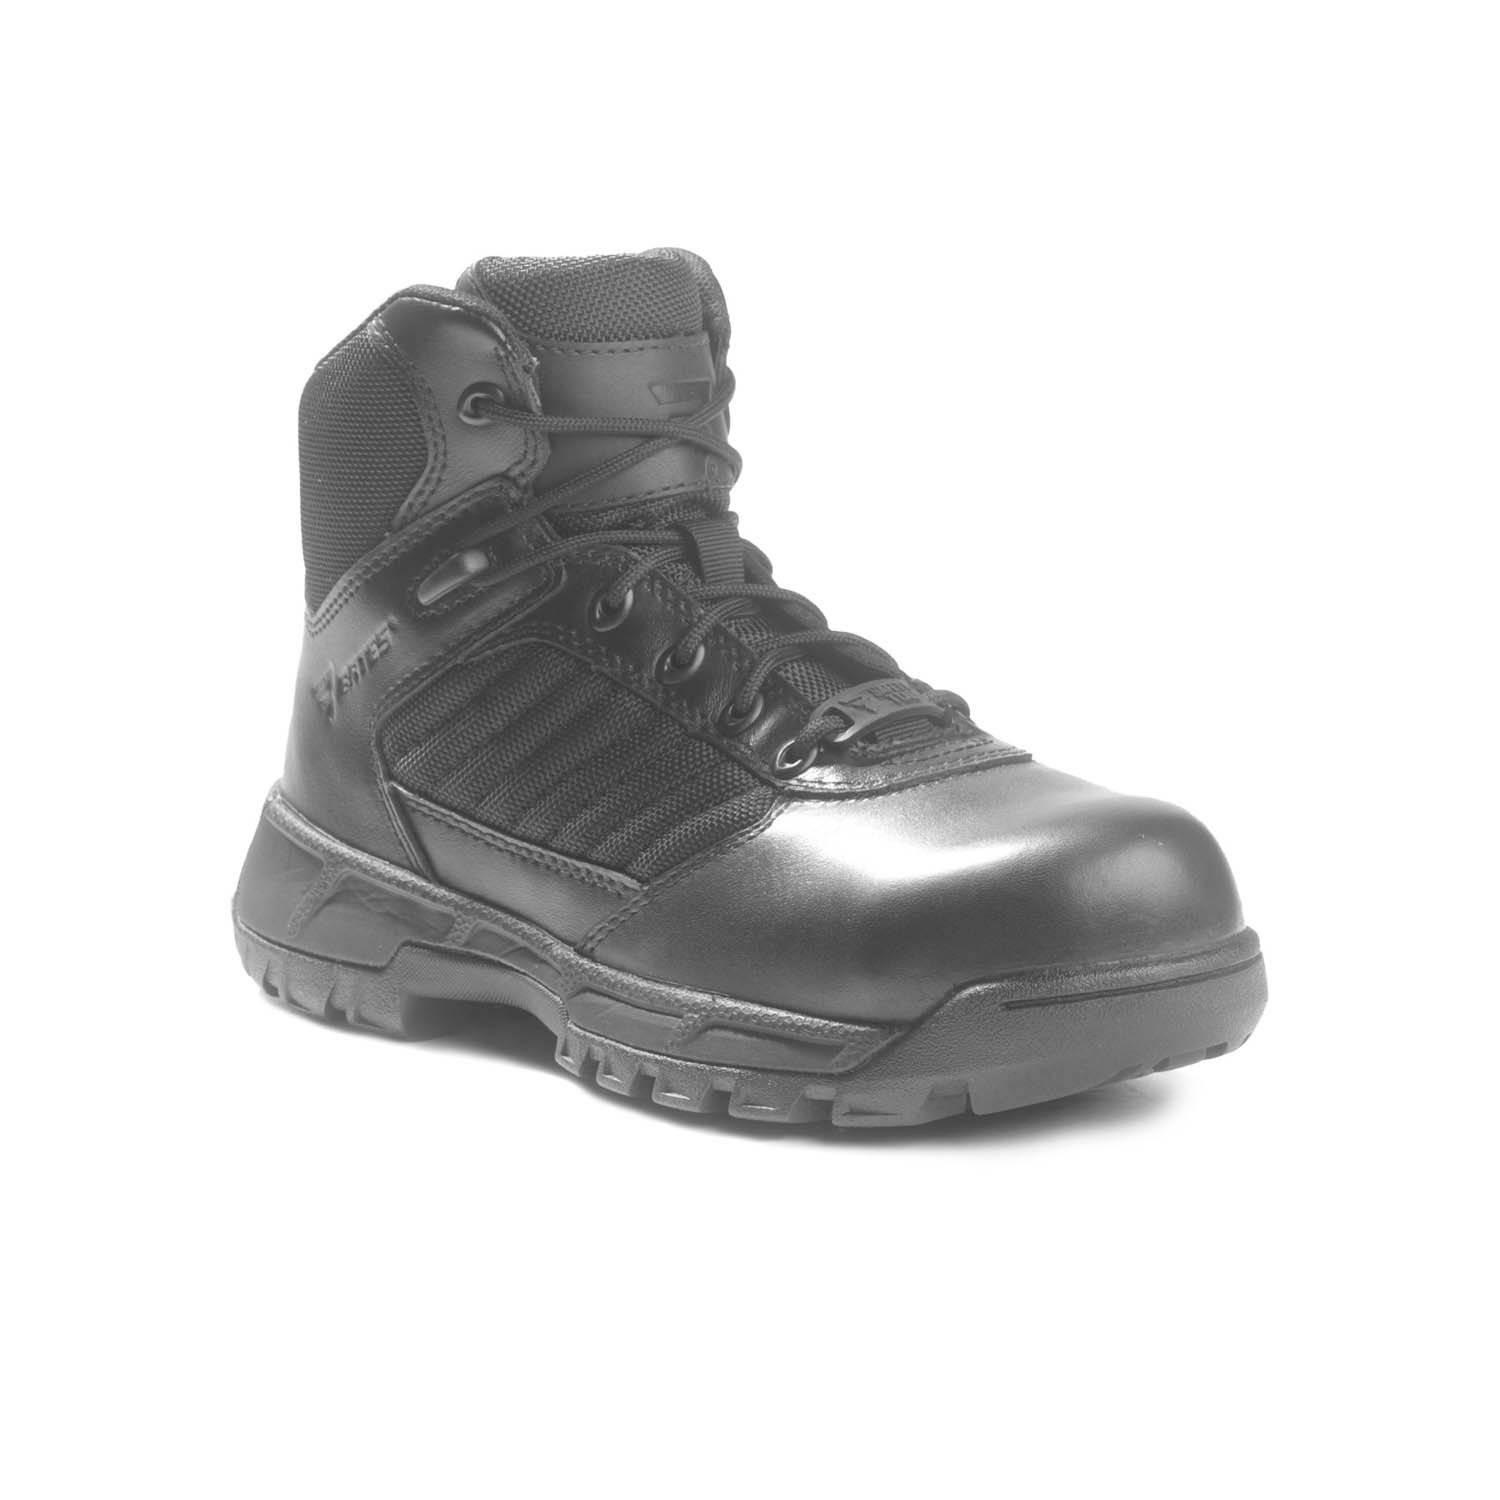 Bates Women's Tactical Sport 2 Mid Composite Toe Military Boot 